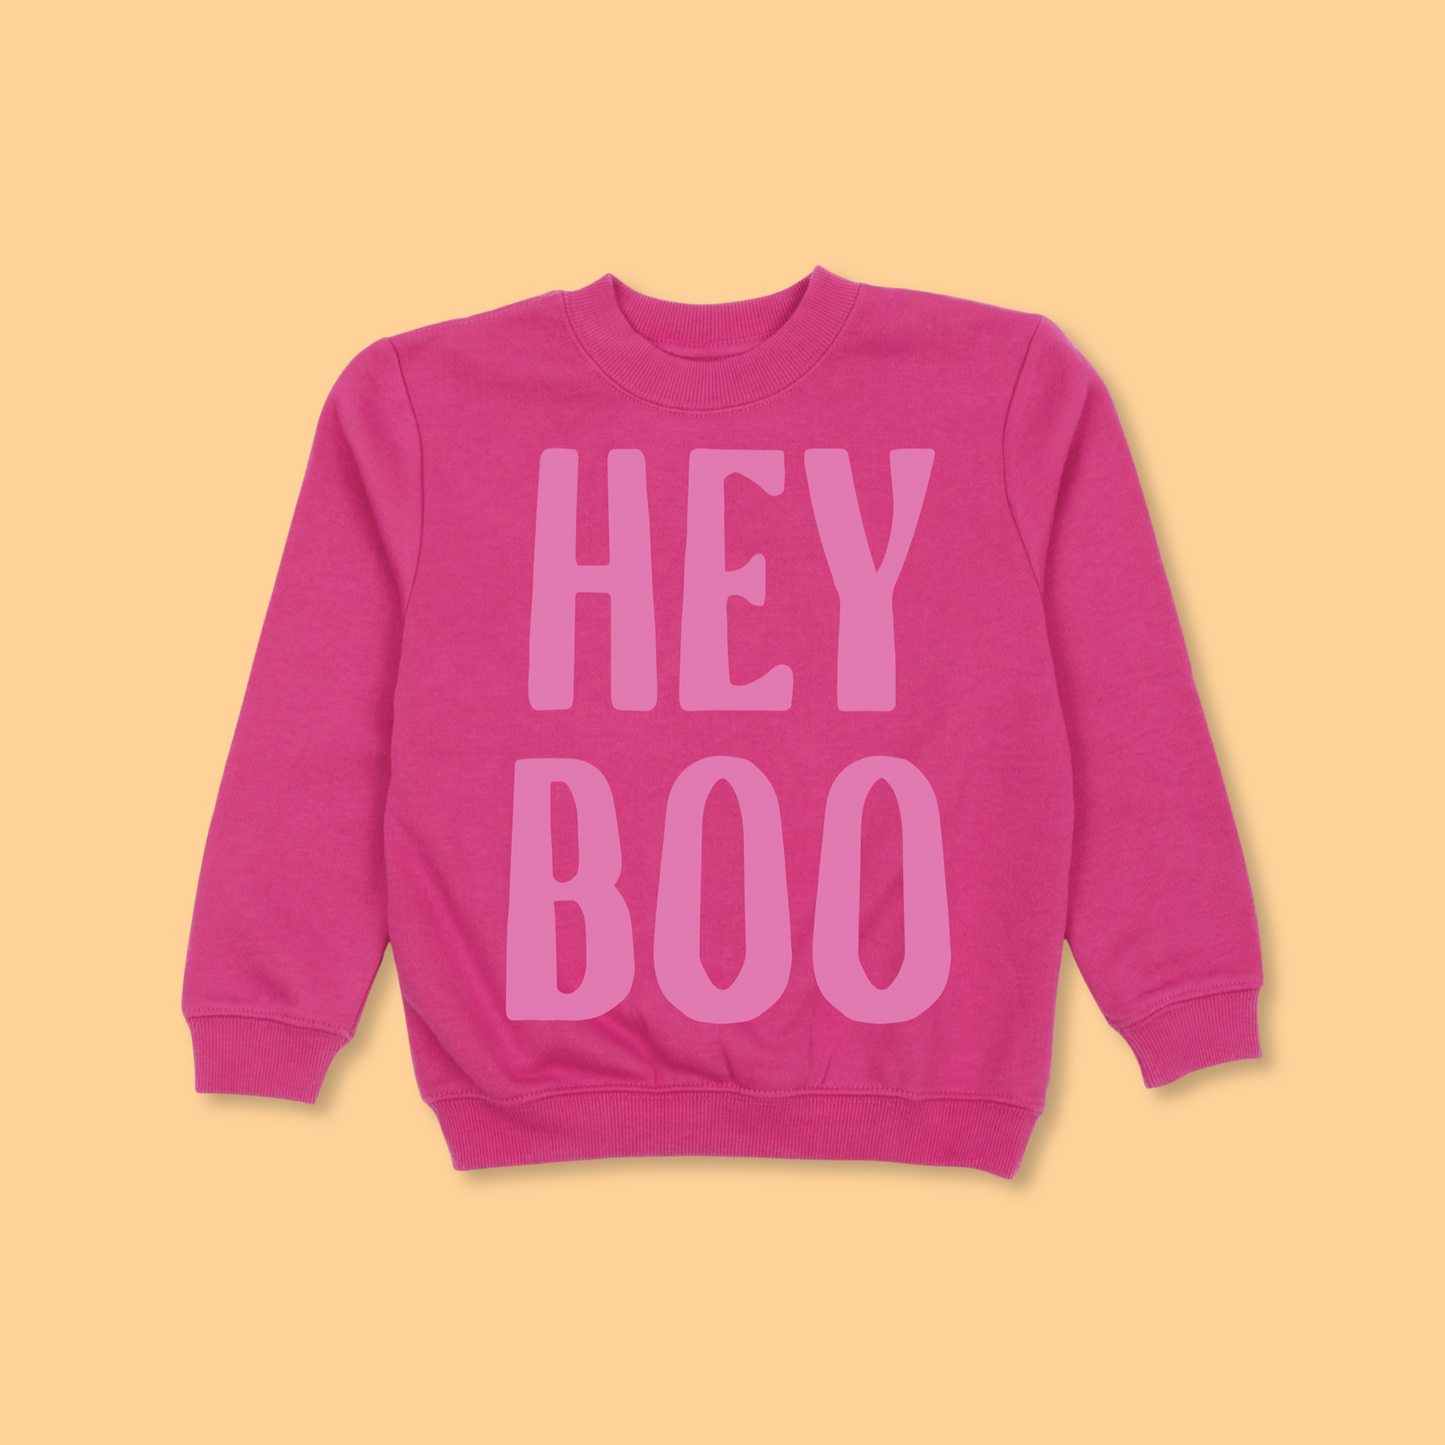 Hey Boo Kids Pullover - Pink/Pink